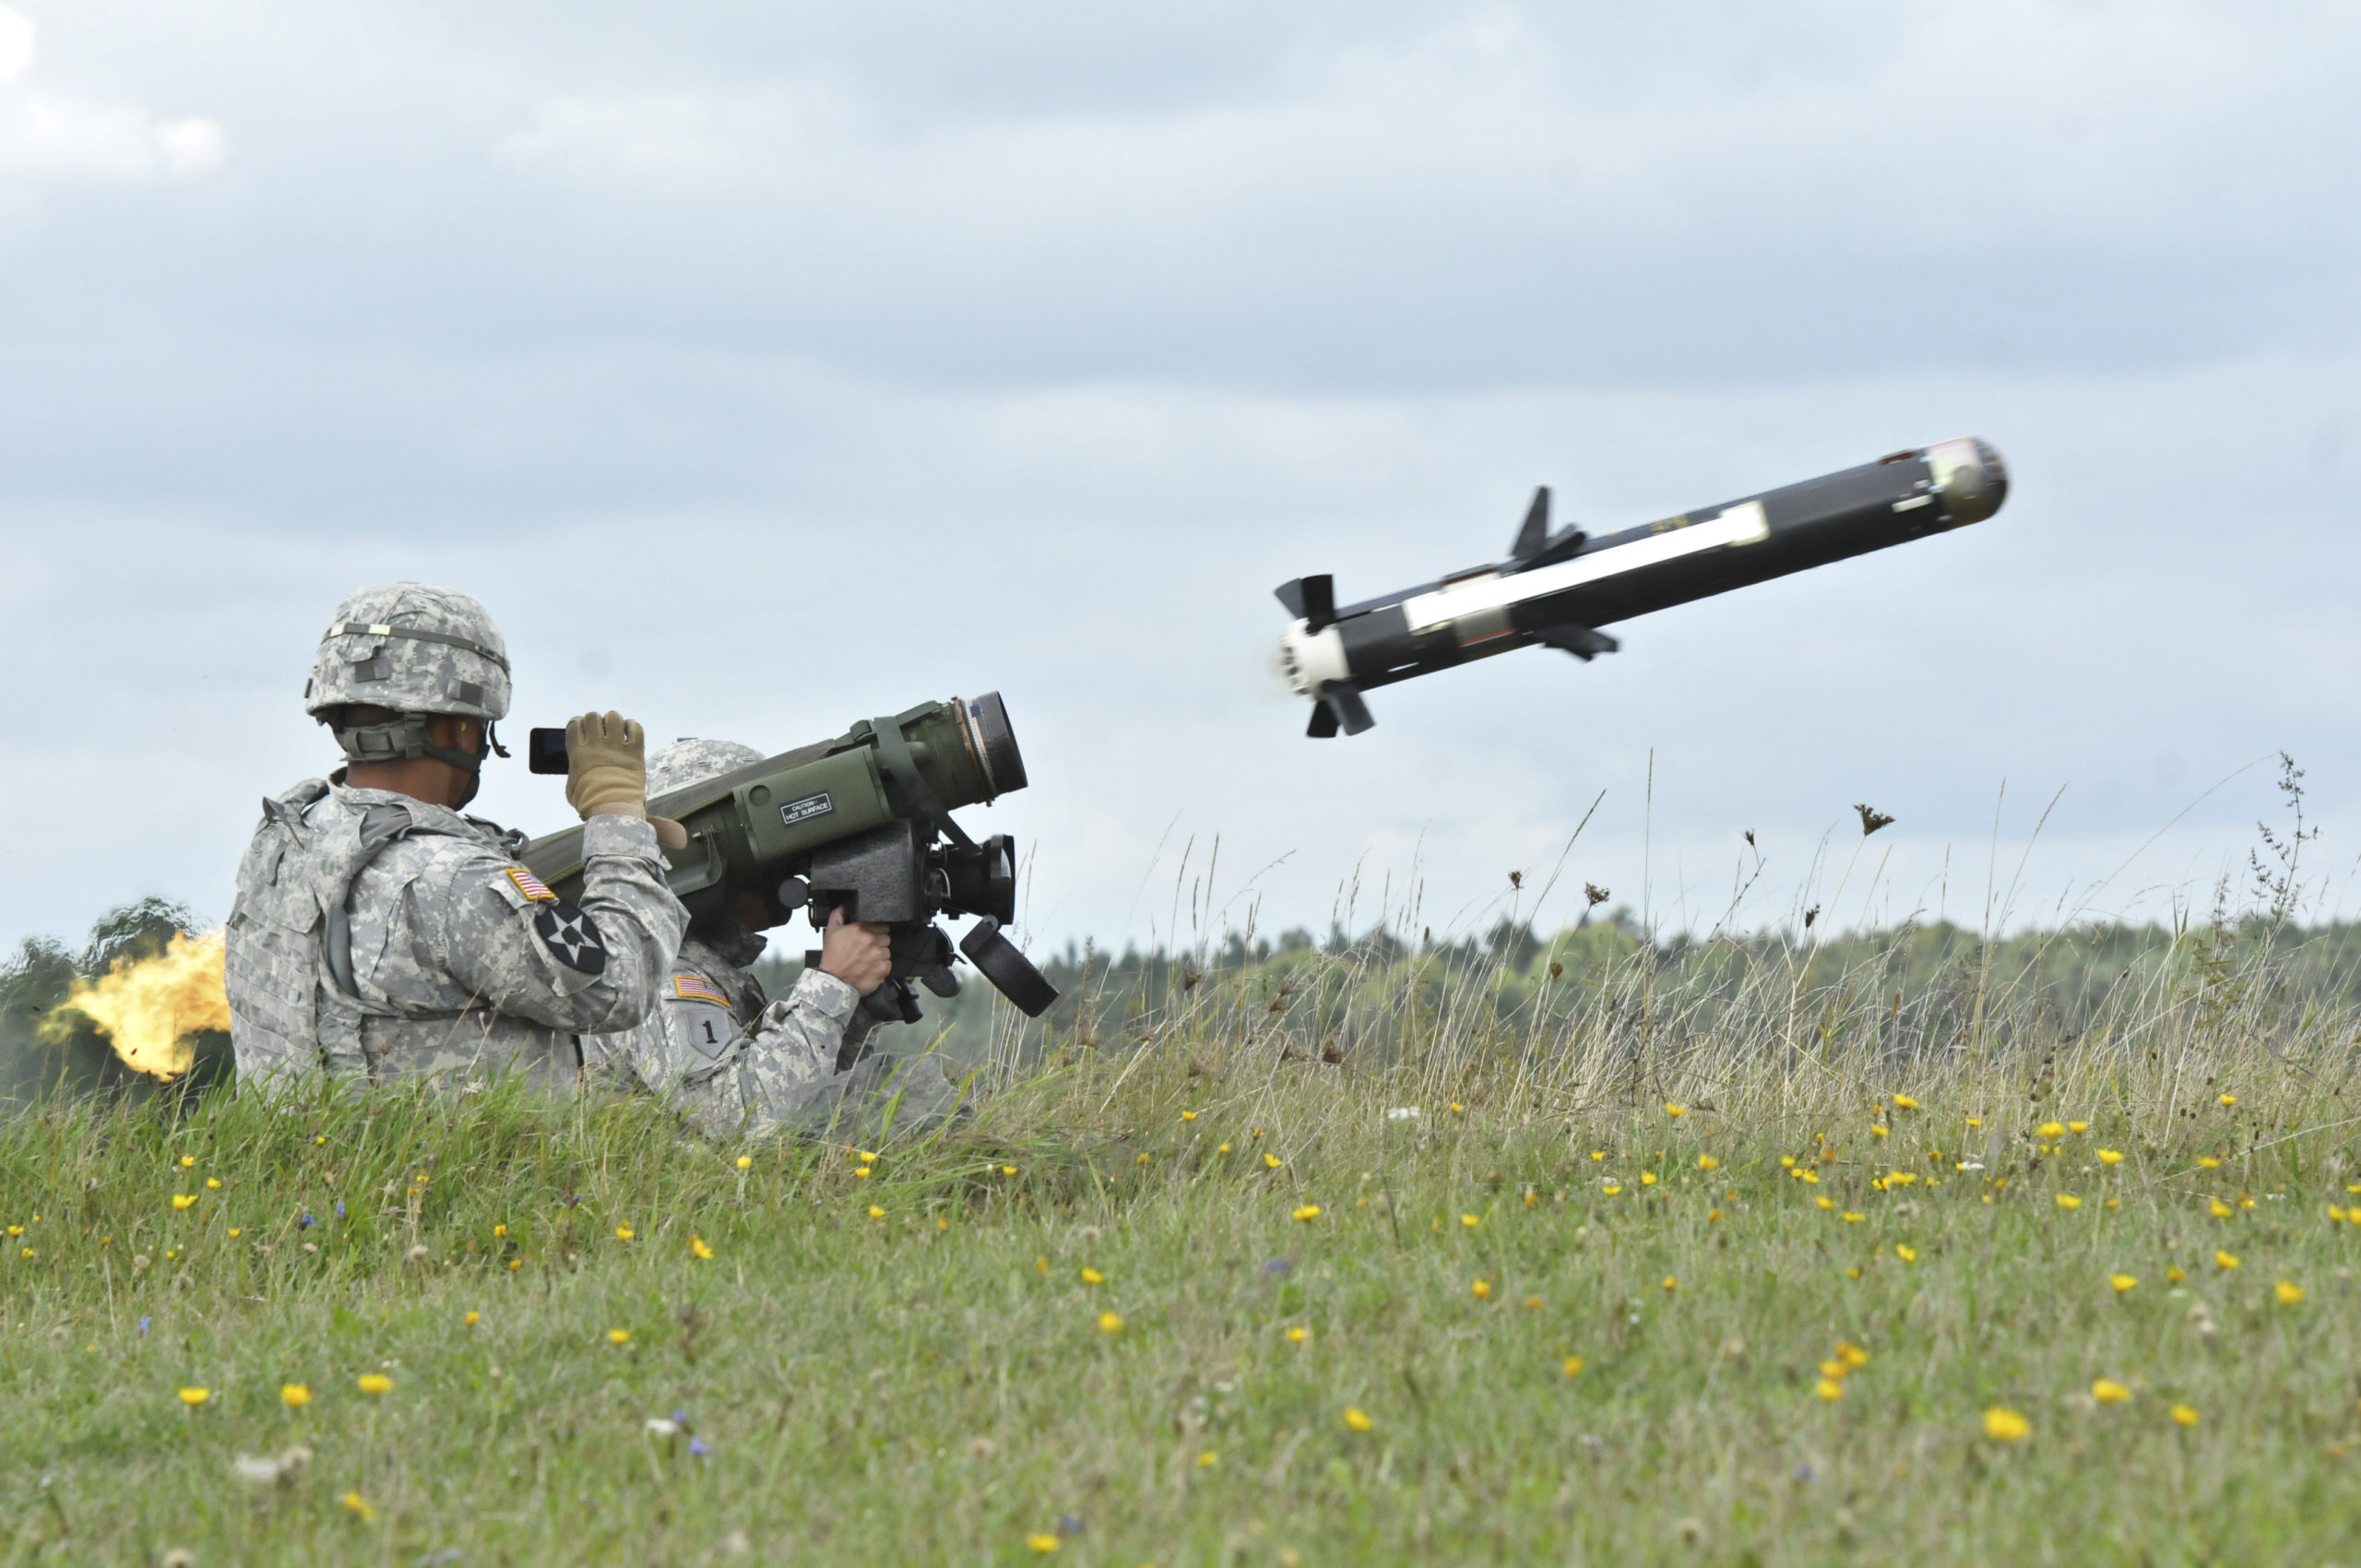 M98 Javelin Weapon System fired during training